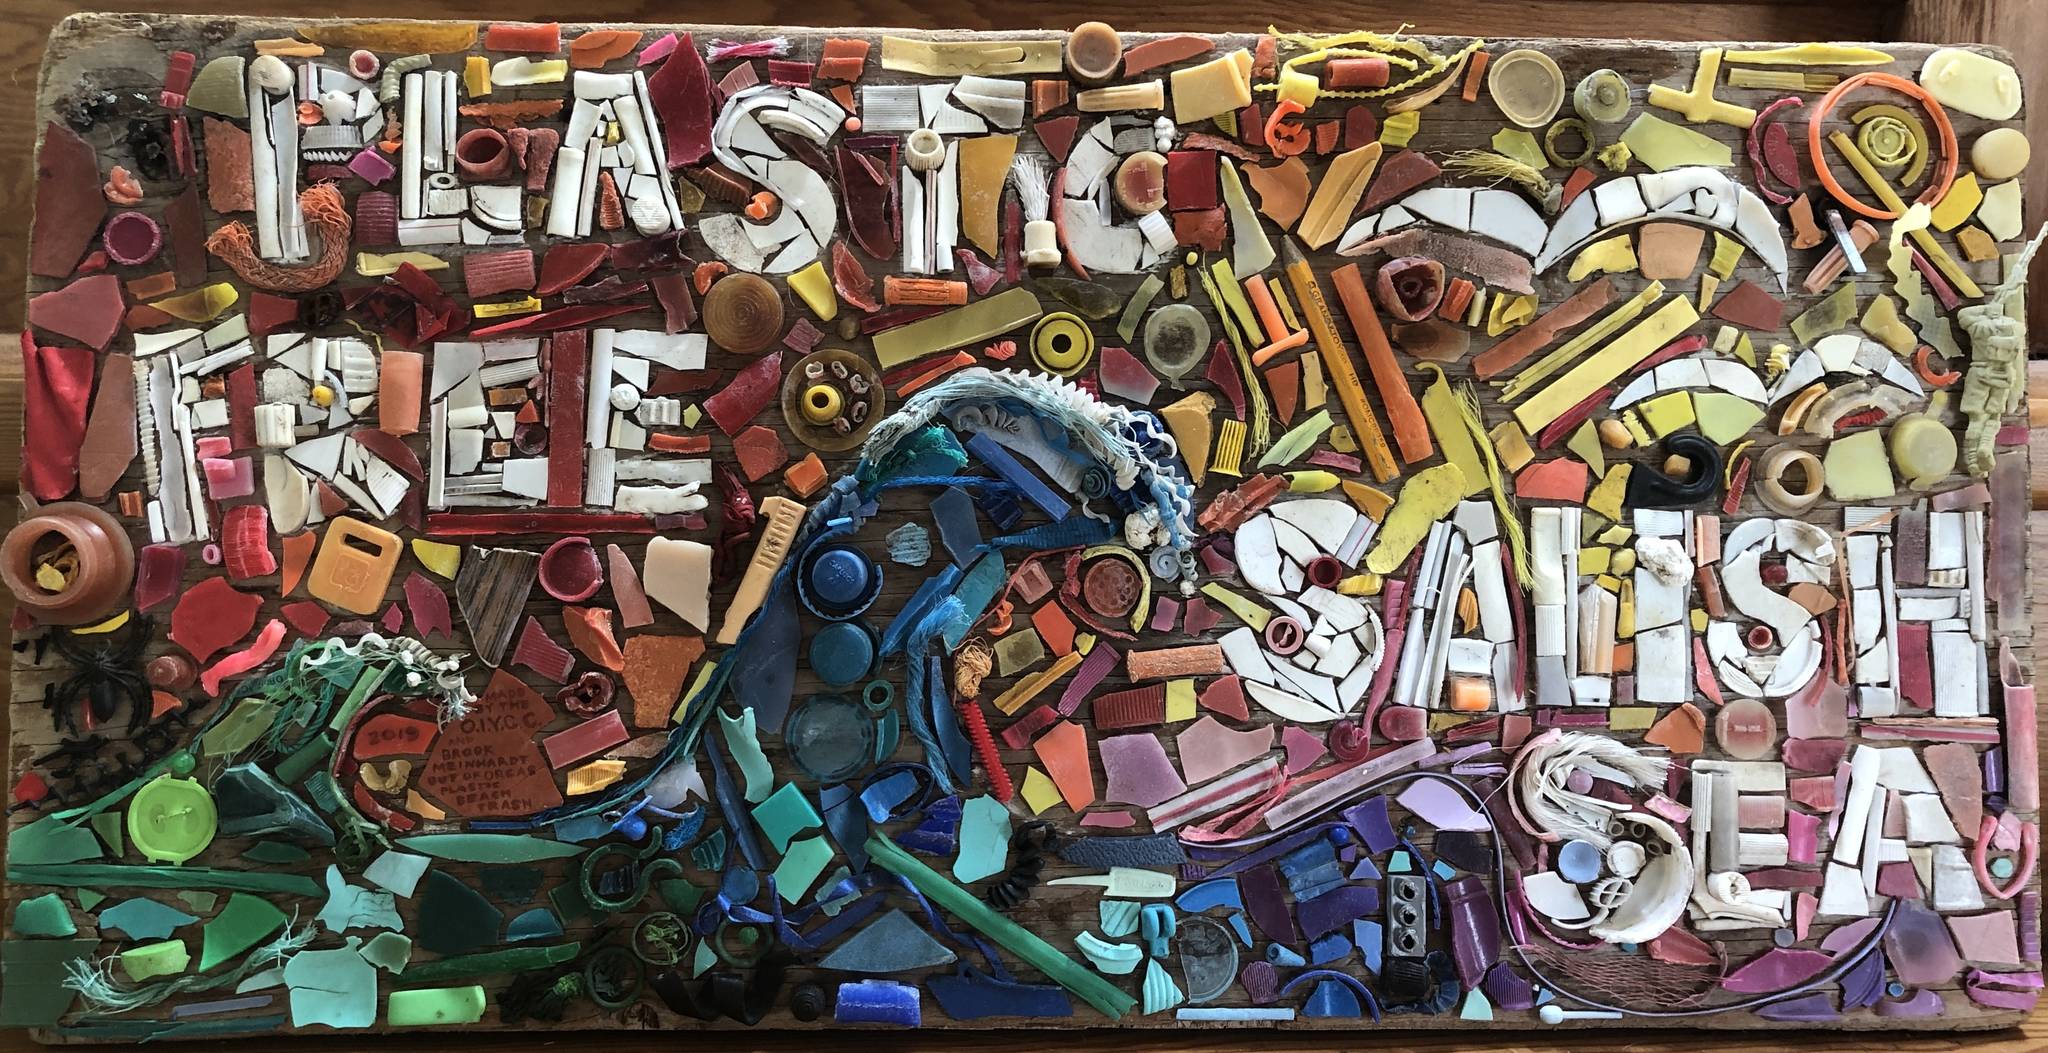 Contributed photo
Plastic Free Salish Sea sign made from plastic found on San Juan County beaches.